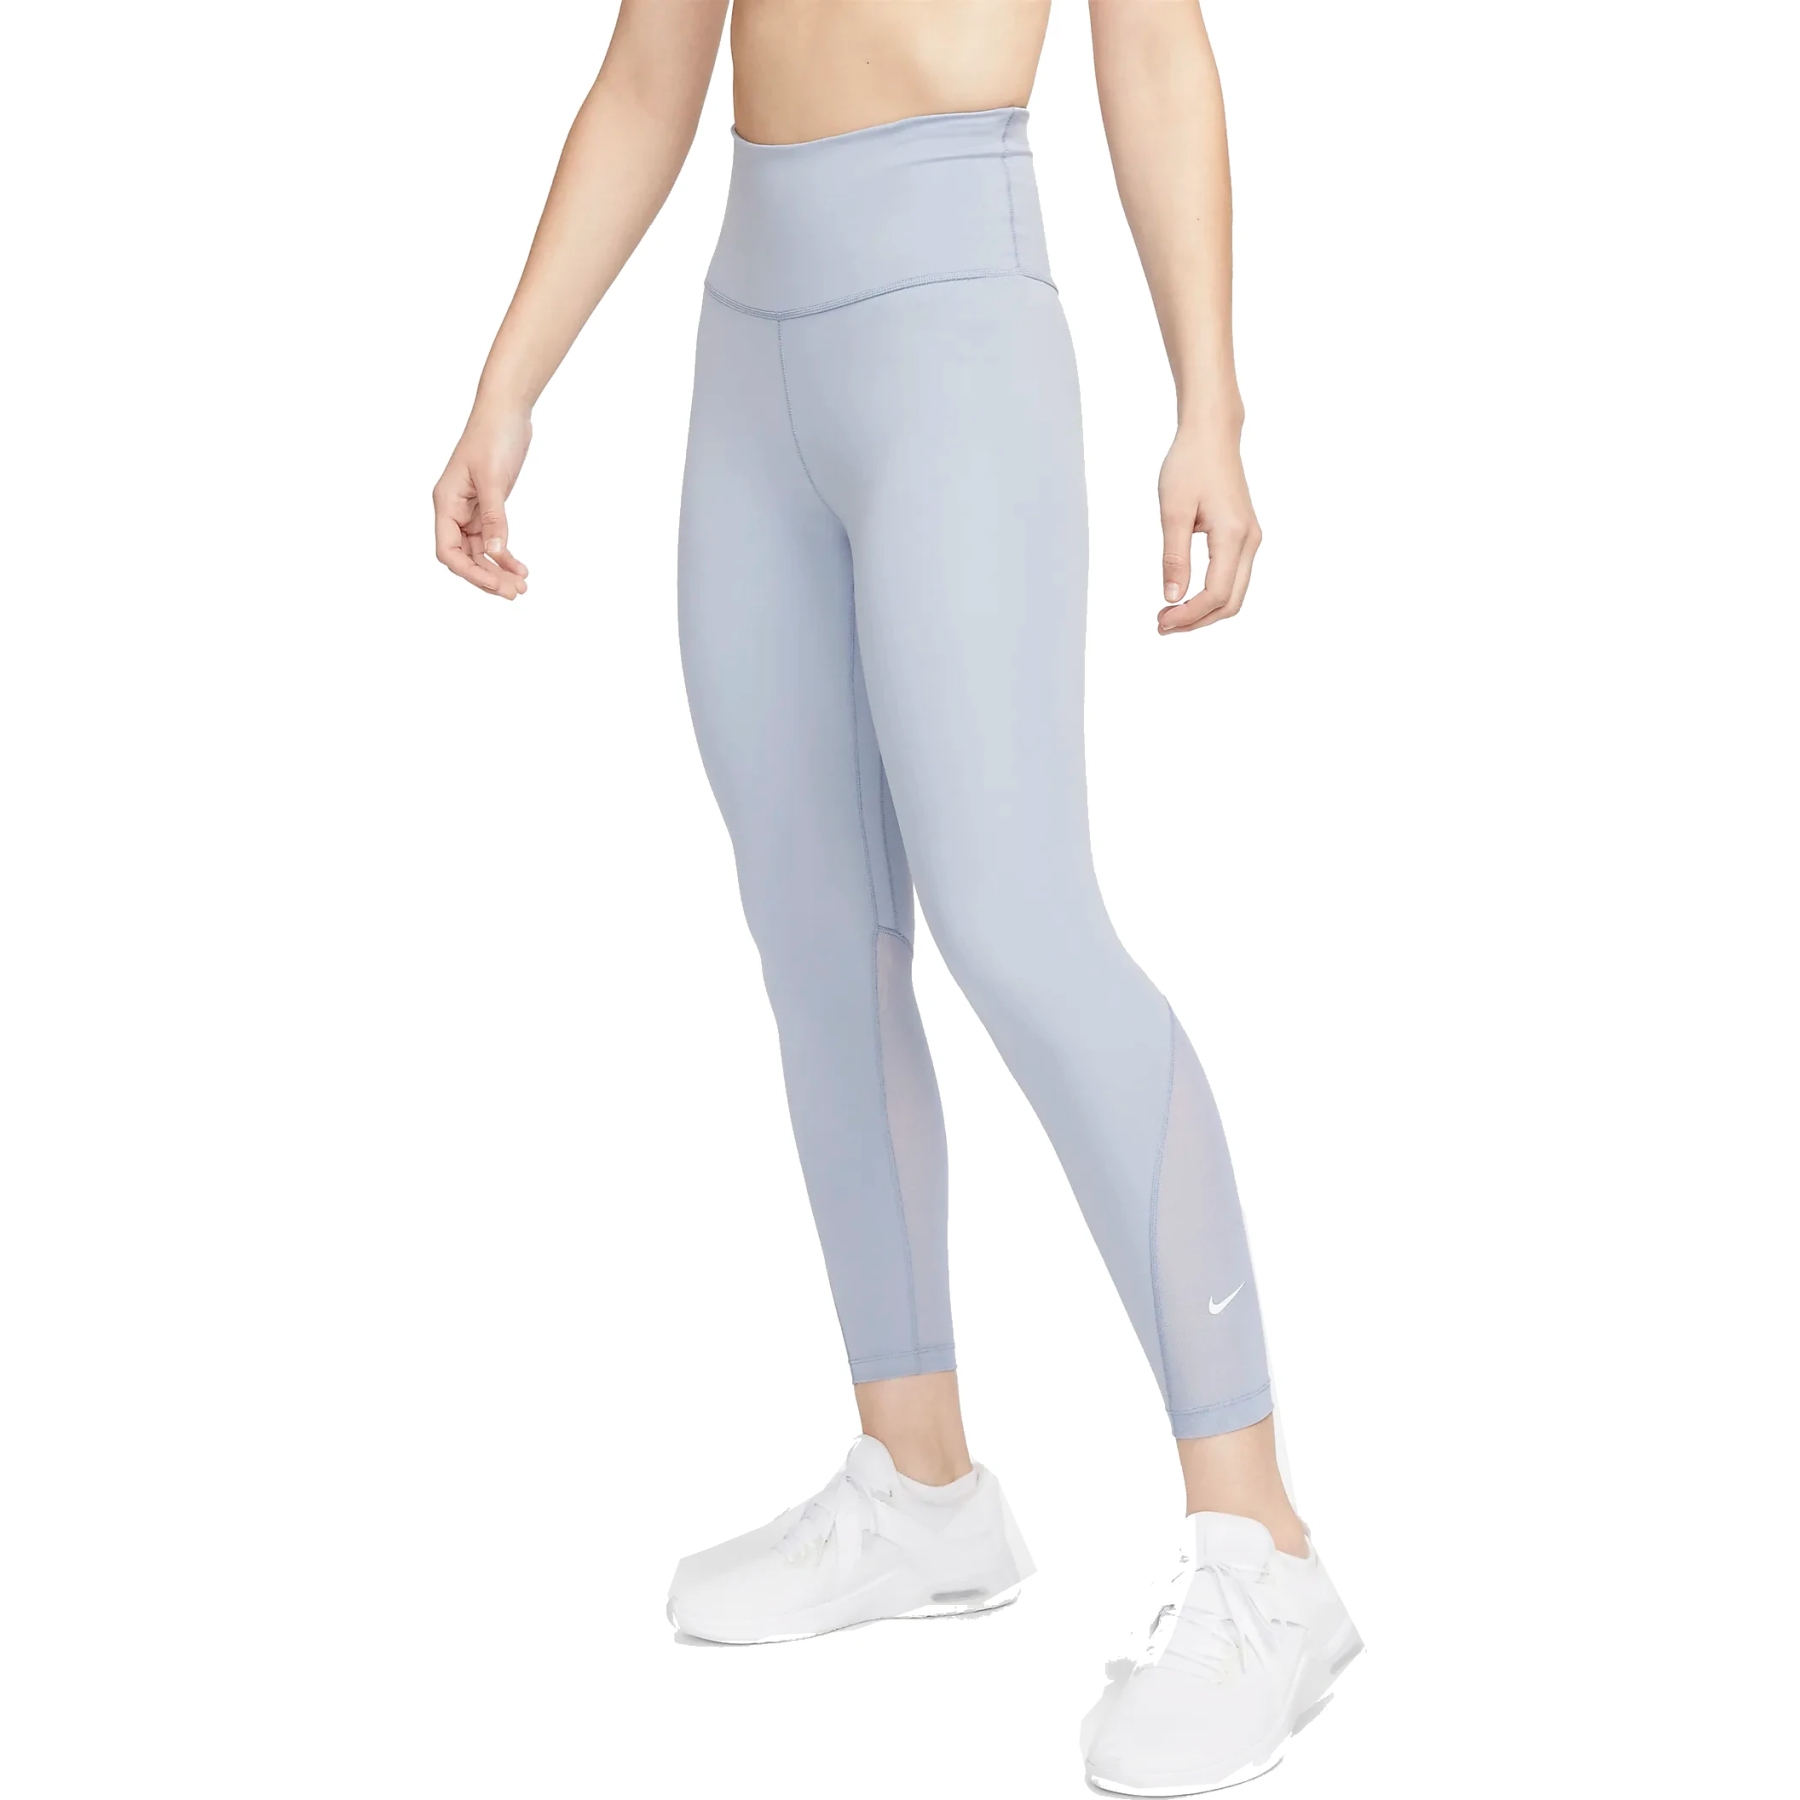 Picture of Nike One Dri-FIT High-Waisted 7/8 Tights Women - indigo haze/white DV9020-519